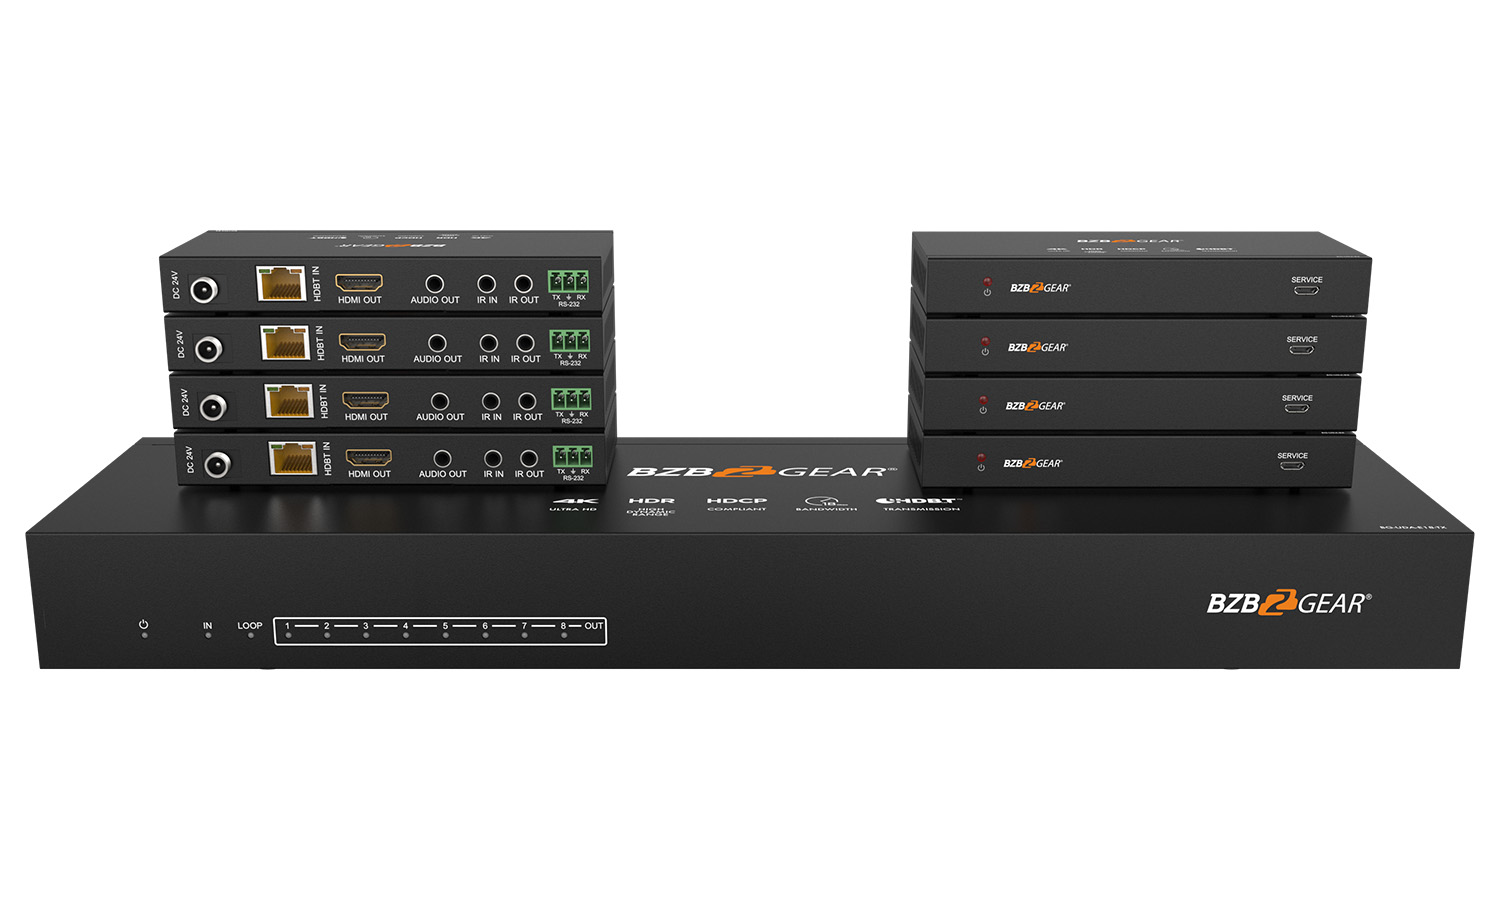 BG-UDA-E18 1x8 4K UHD HDMI HDBaset Splitter/Distribution Amplifier over Category Cable (Kit, Includes 8x RX) by BZBGEAR